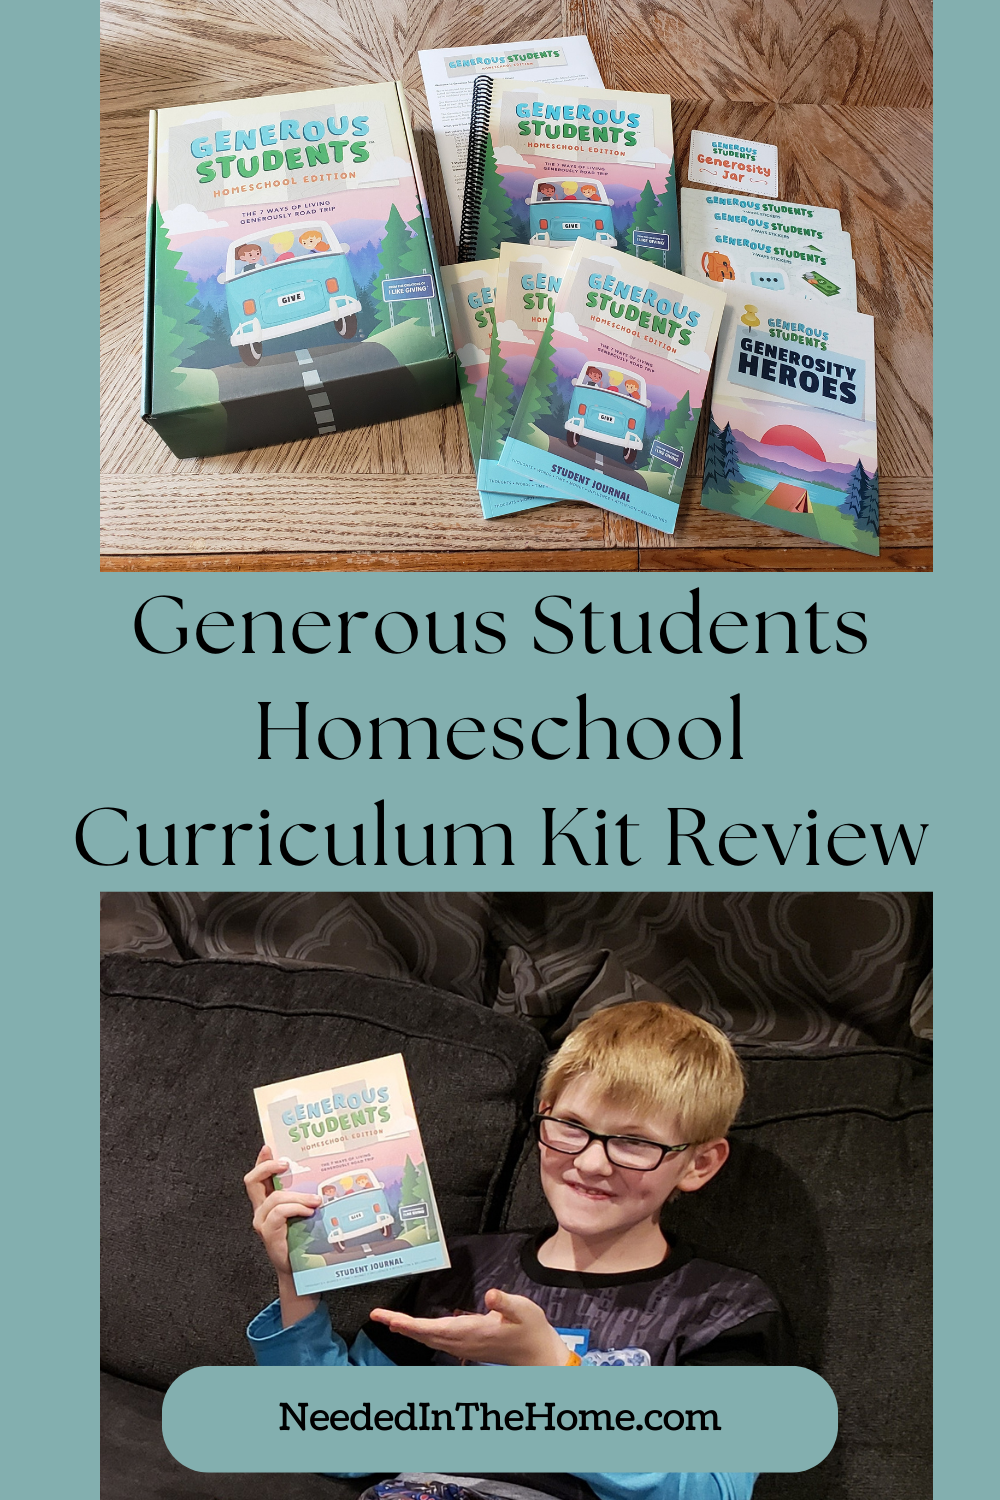 generous students homeschool curriculum kit example review boy holding and pointing to journal book neededinthehome